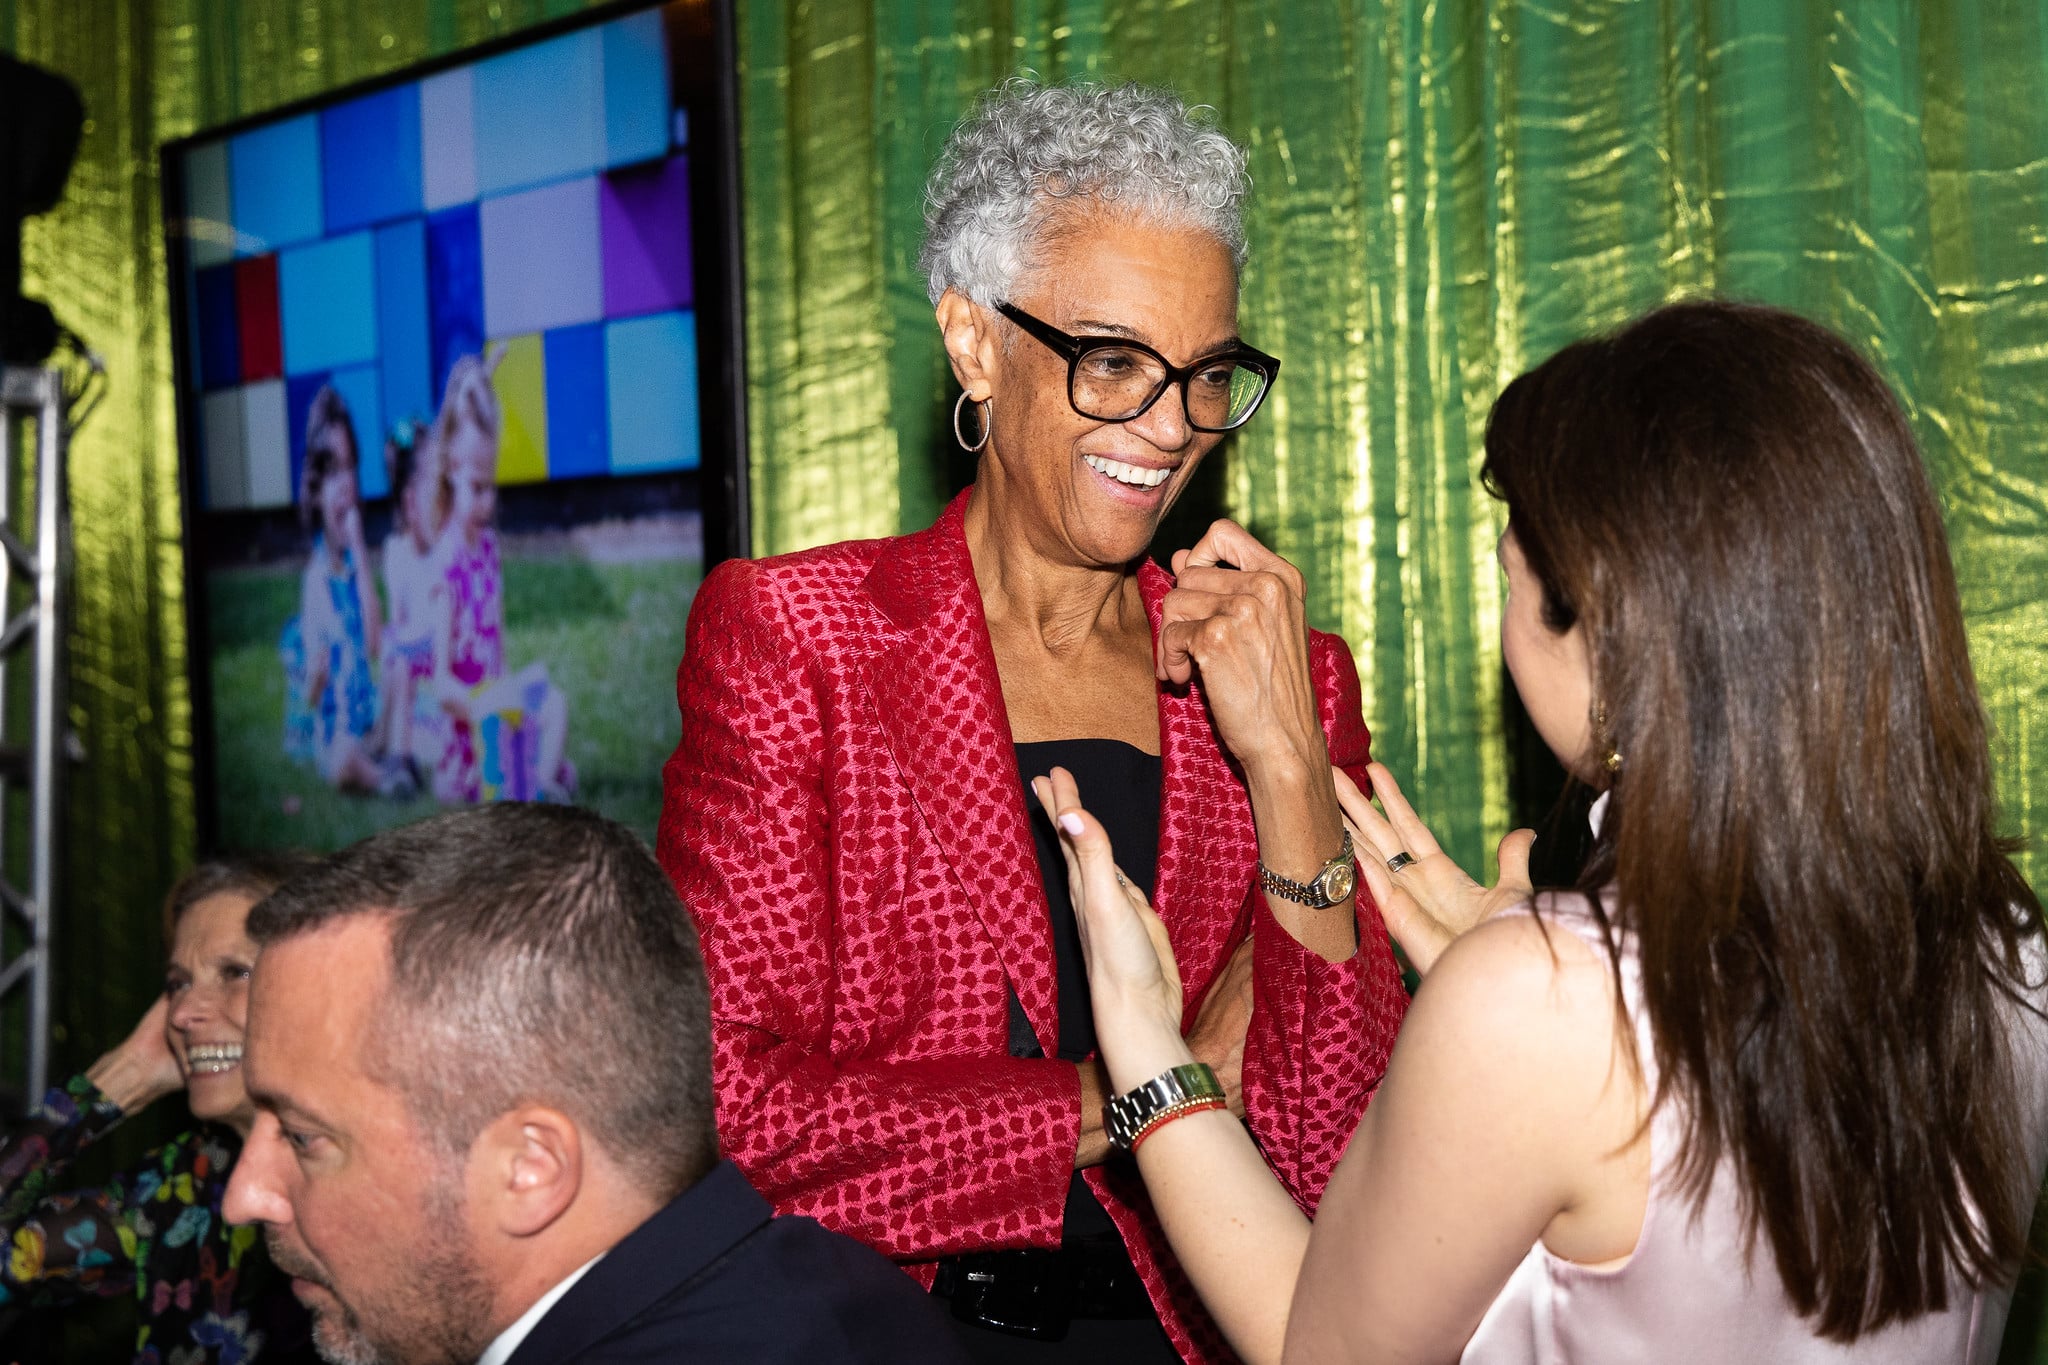 Jackie Martin Gala on the Green® at Discovery Green in downtown Houston. February 23, 2023. Photo: Lawrence Elizabeth Knox